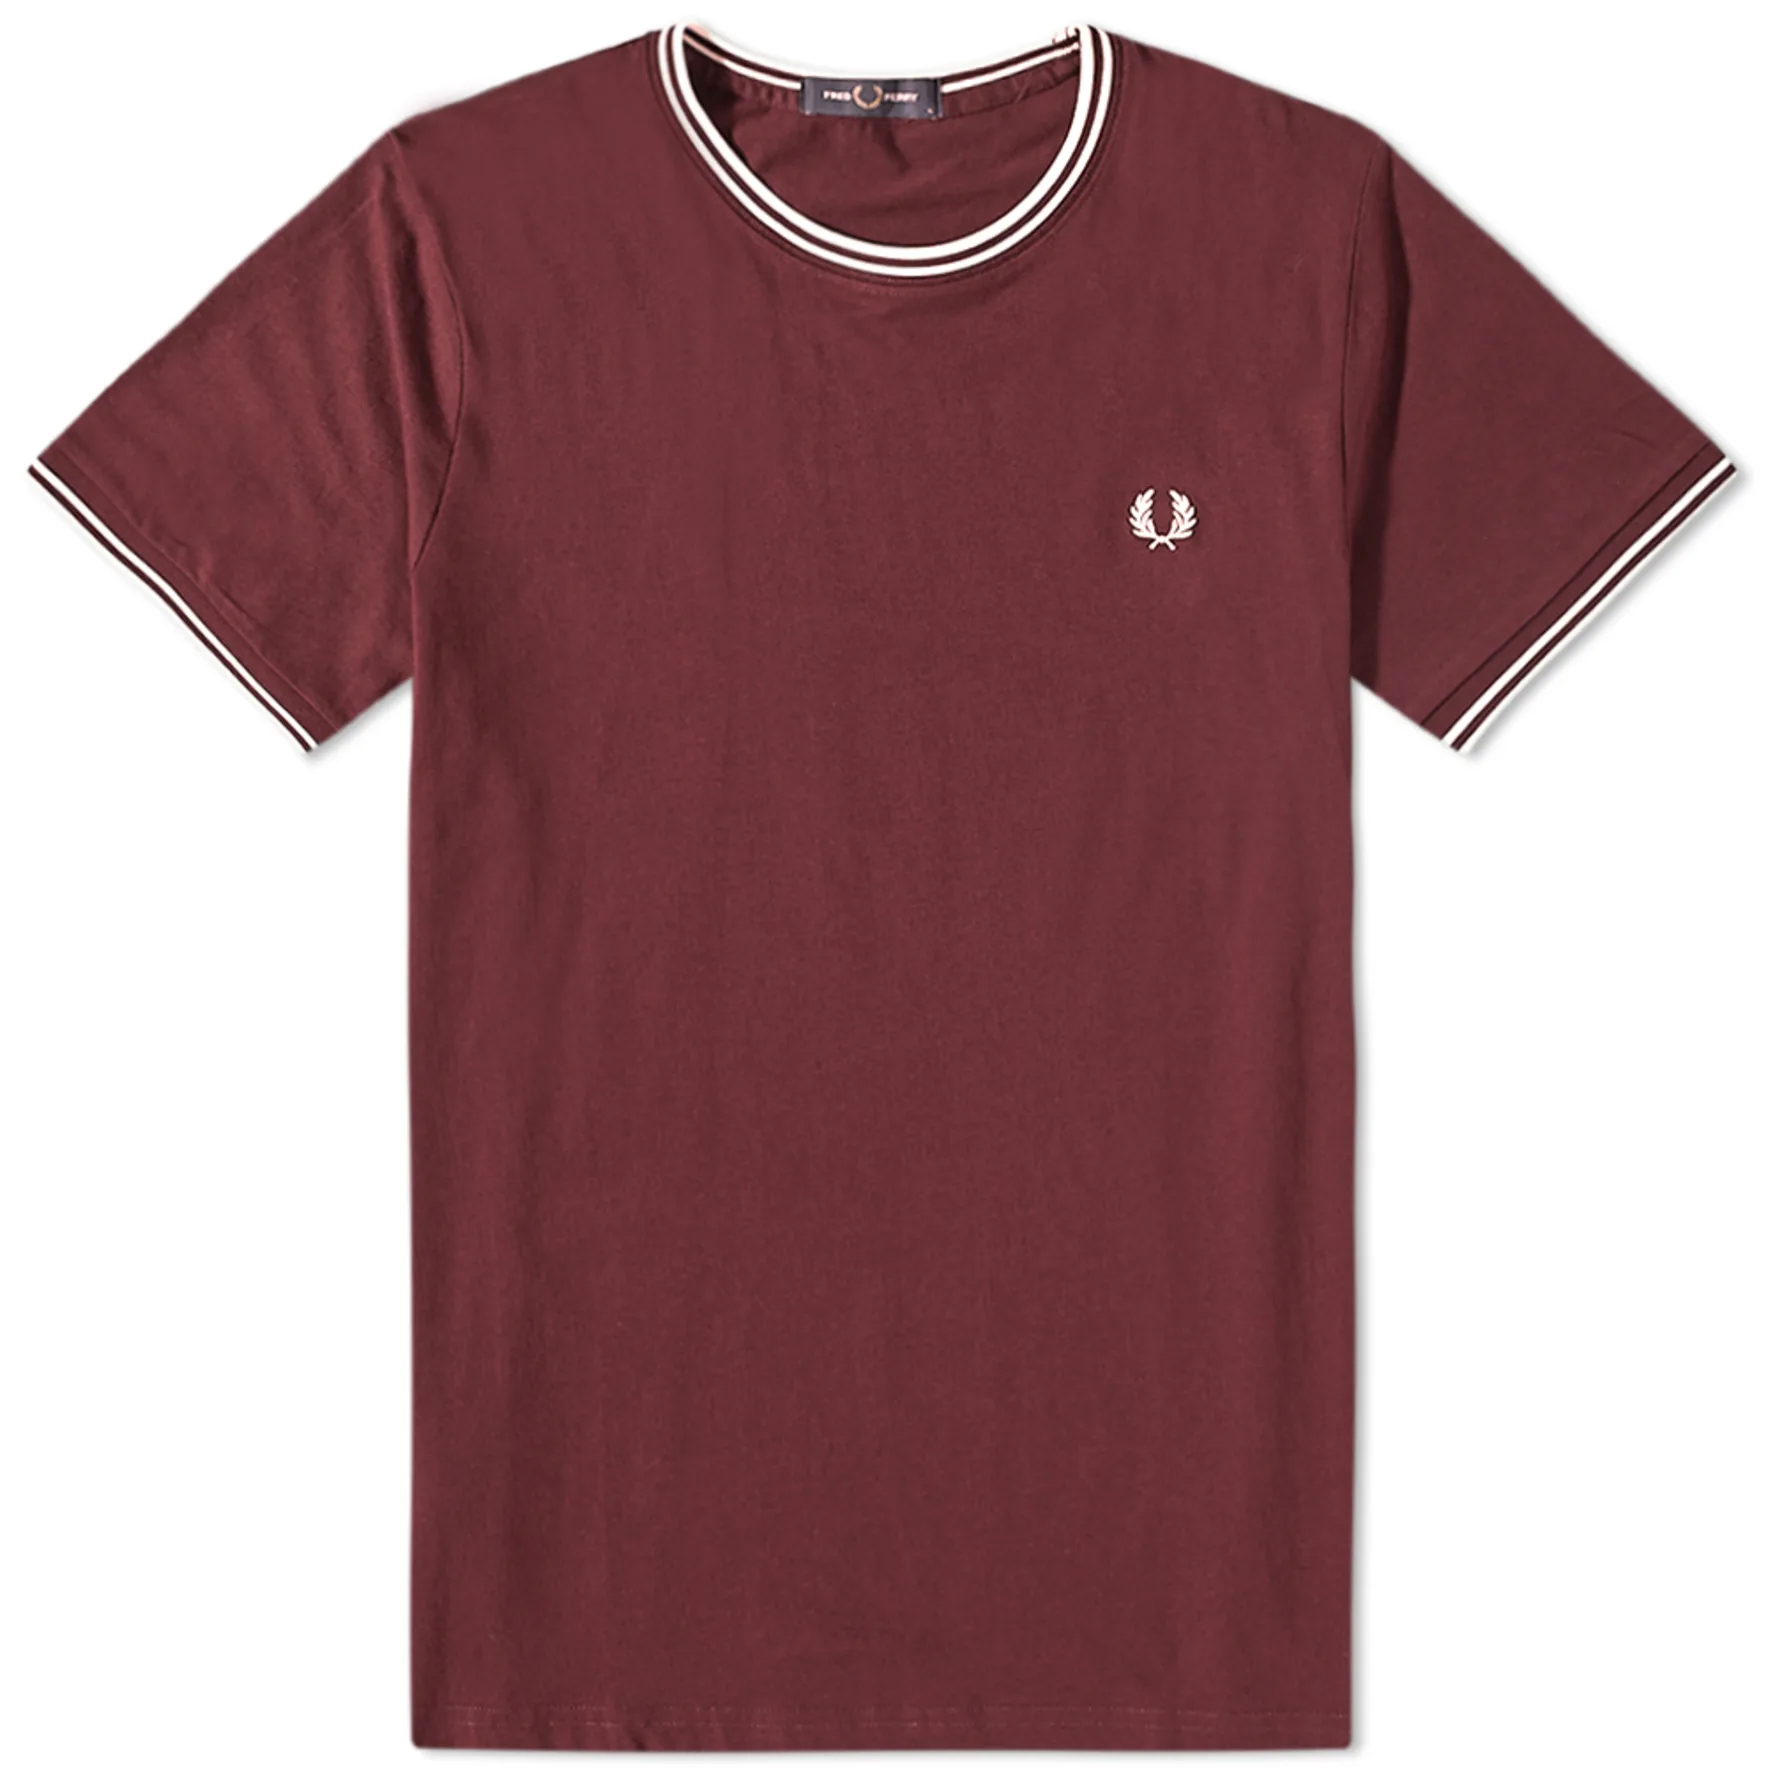 Футболка Fred Perry Authentic Twin Tipped, бордовый поло fred perry twin tipped цвет black snow